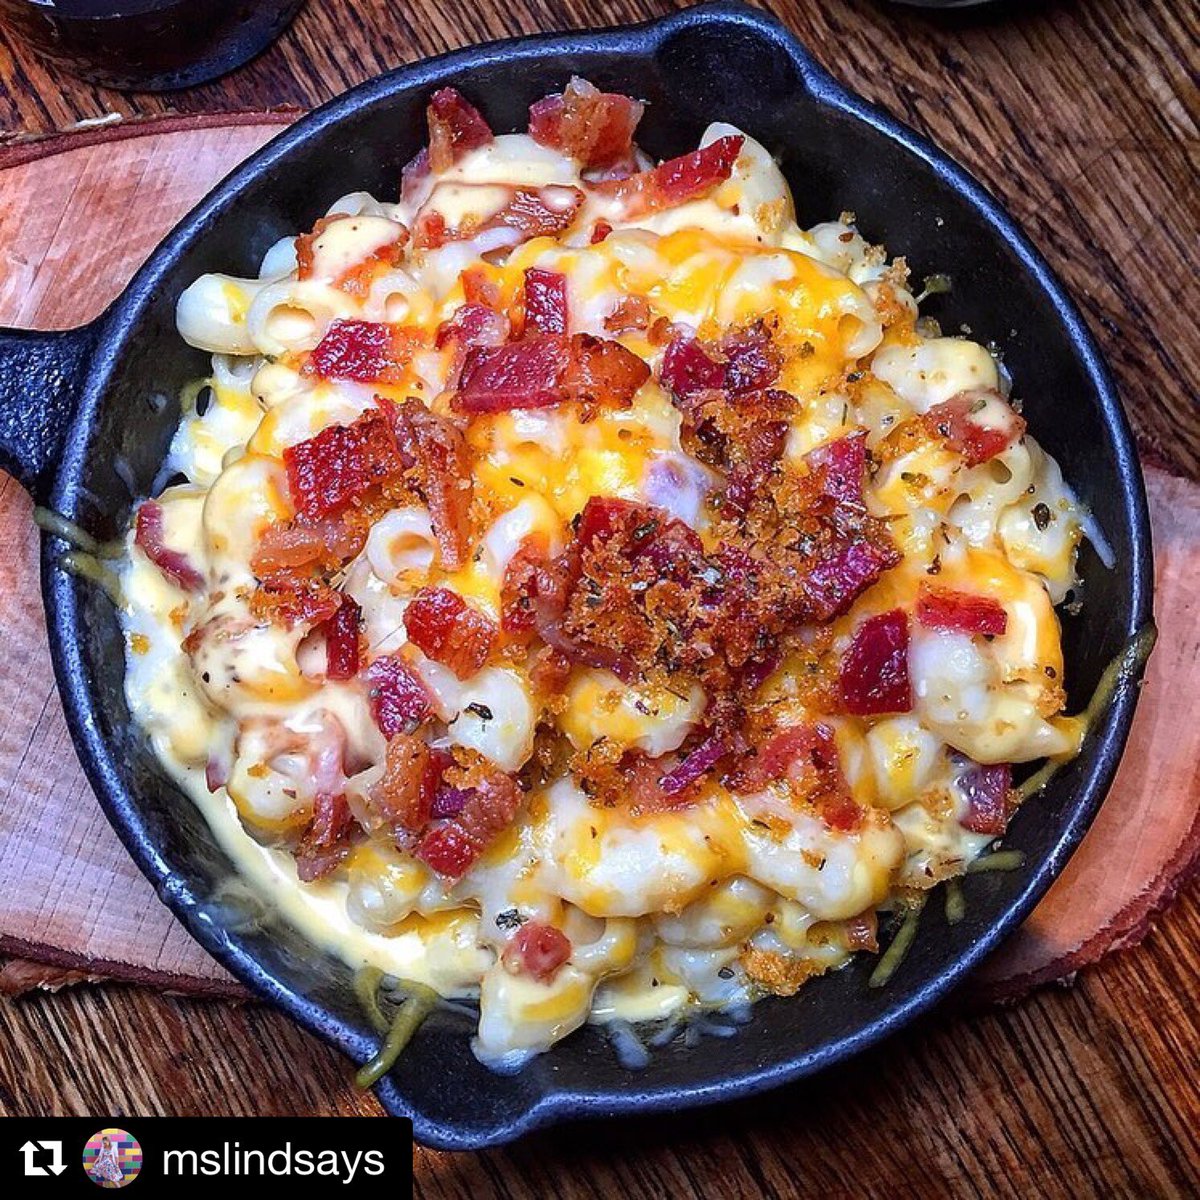 Dive in 🧀
#macandcheese #macaroni #pasta #cheese #cheesy #noodles #cheesepull #bacon #comfortfood #brunch #foodstagram #thedailybite #sogood #food #lovefood #foodphoto #love #yum #nyc #nycfoodie  #hungry #tryitordiet #topcitybites #nycfat #foodpornshare #eatupnewyork #feedfeed